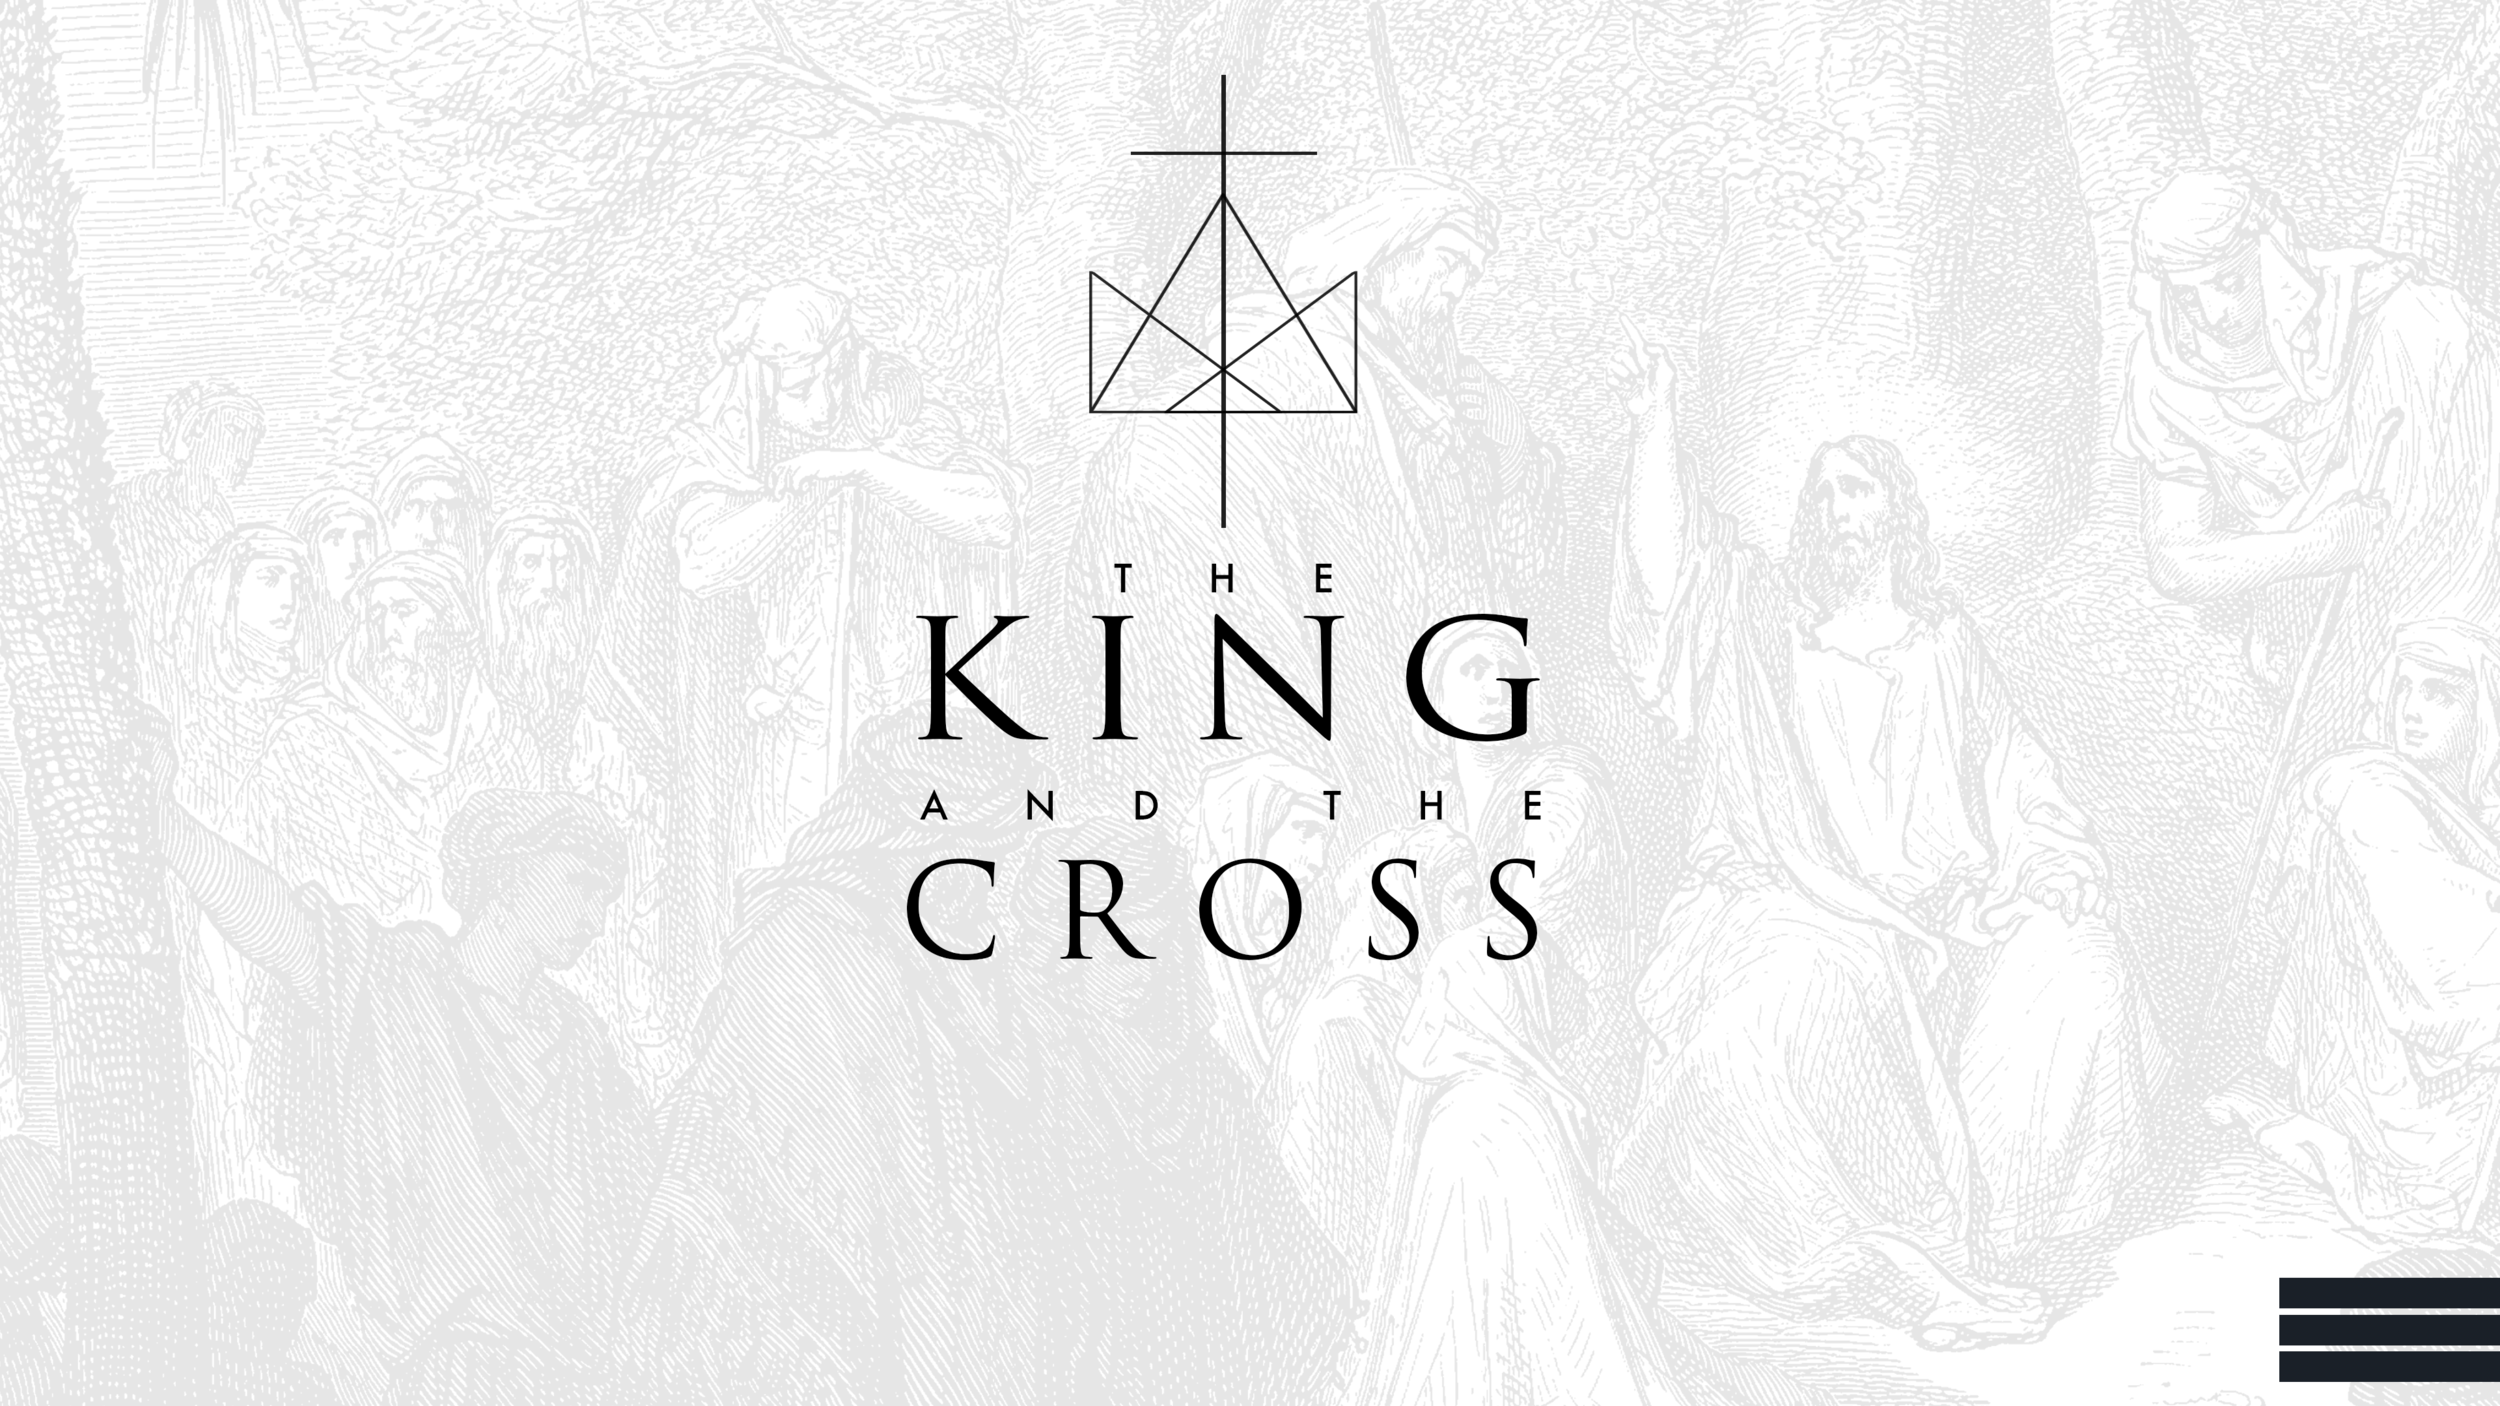 The King and the Cross